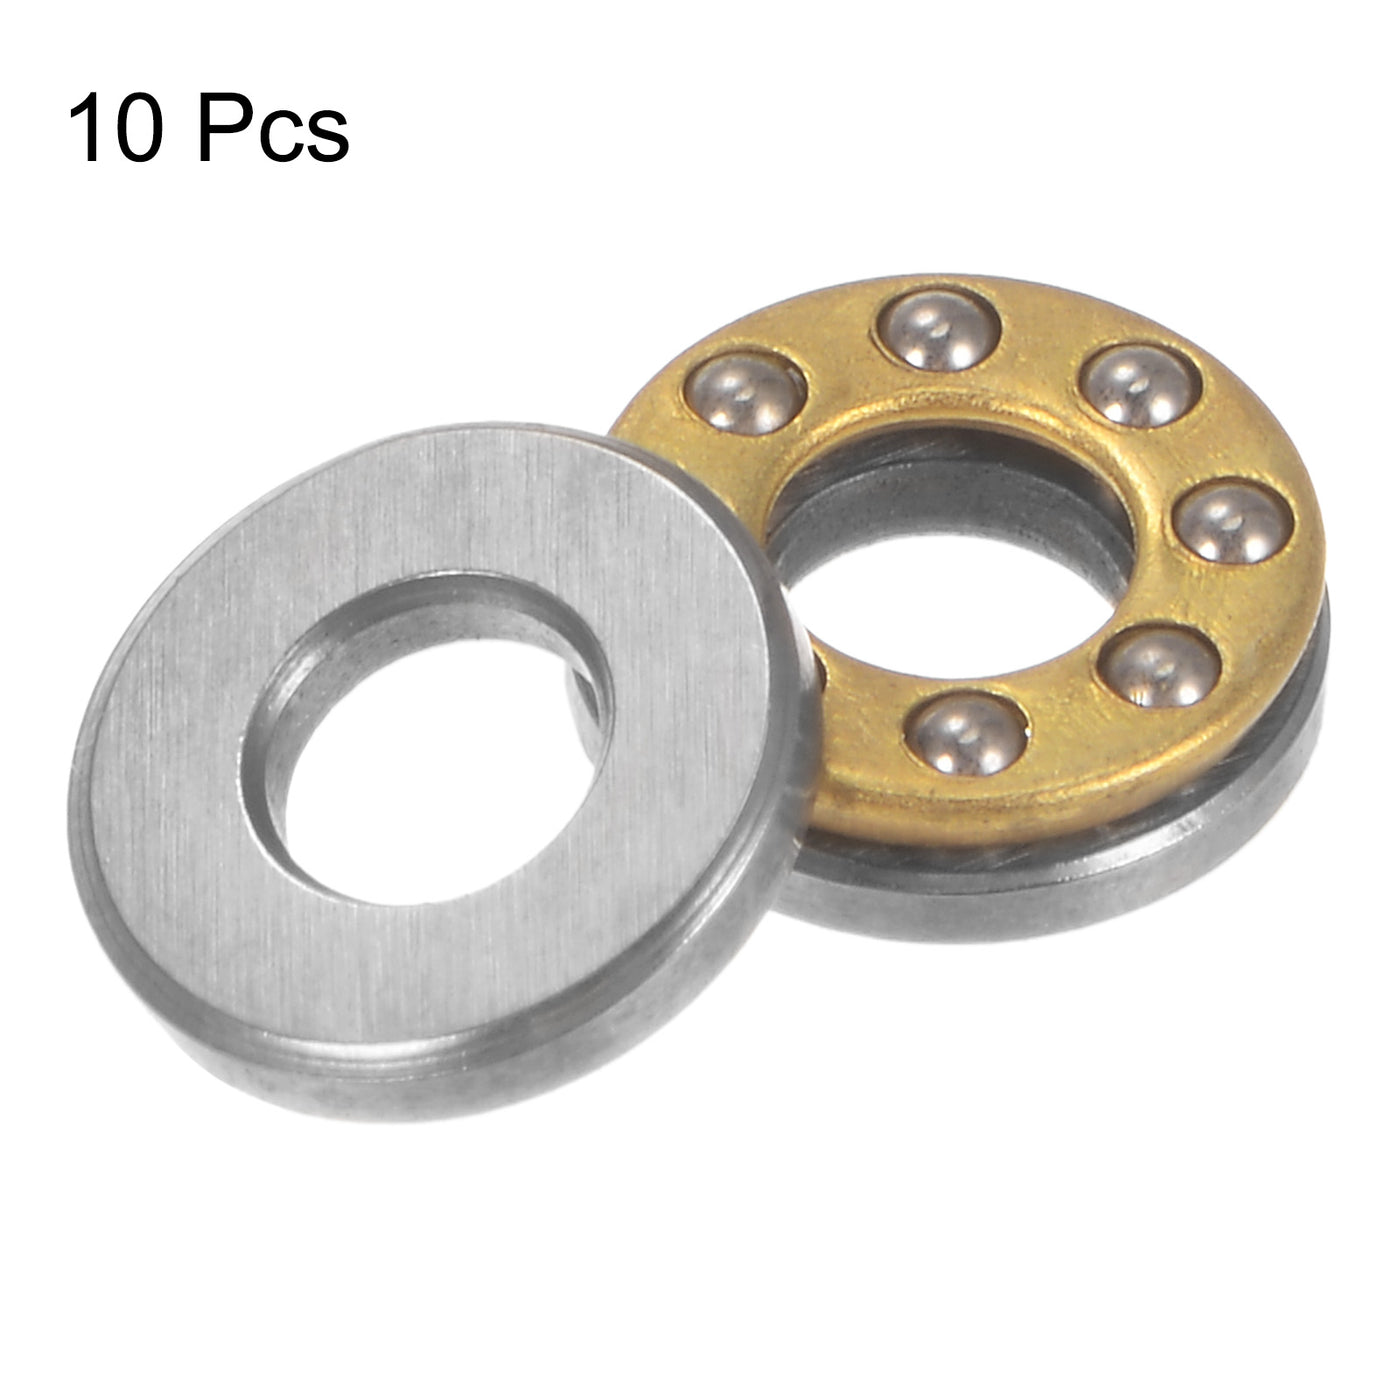 uxcell Uxcell F4-9M Thrust Ball Bearing 4x9x4mm Brass with Washers 10pcs